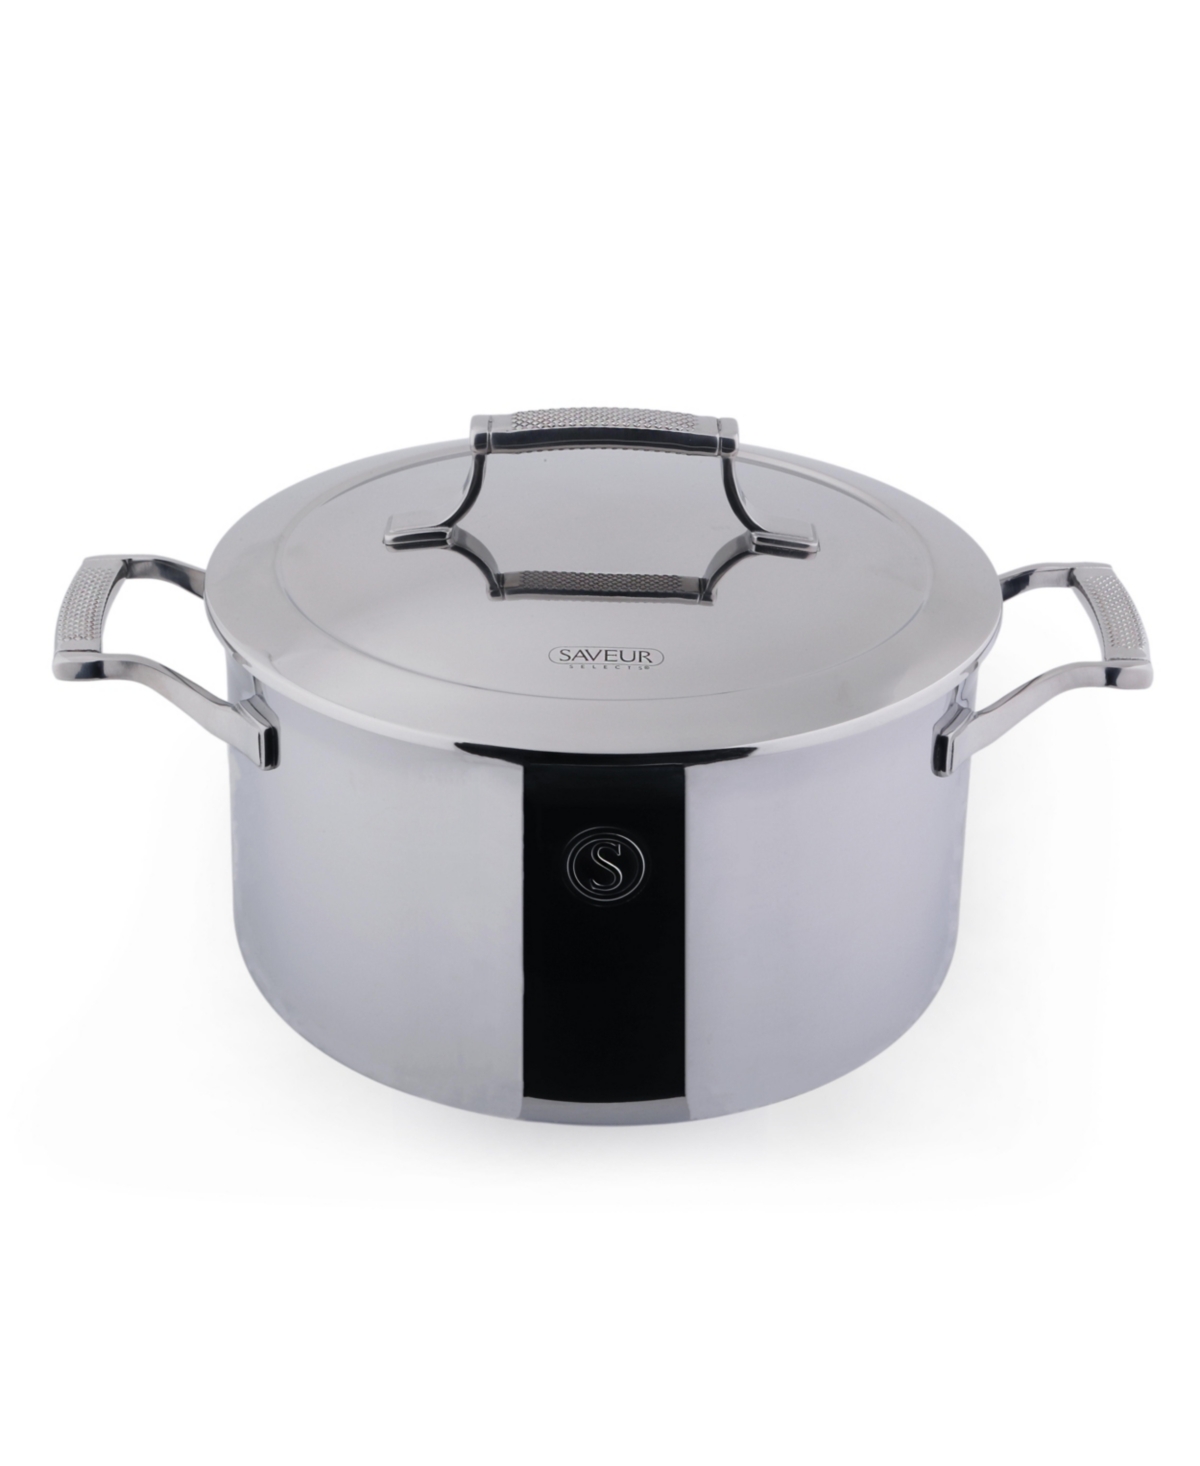 Saveur Selects Voyage Series Tri-ply Stainless Steel 6-qt. Stockpot In Silver